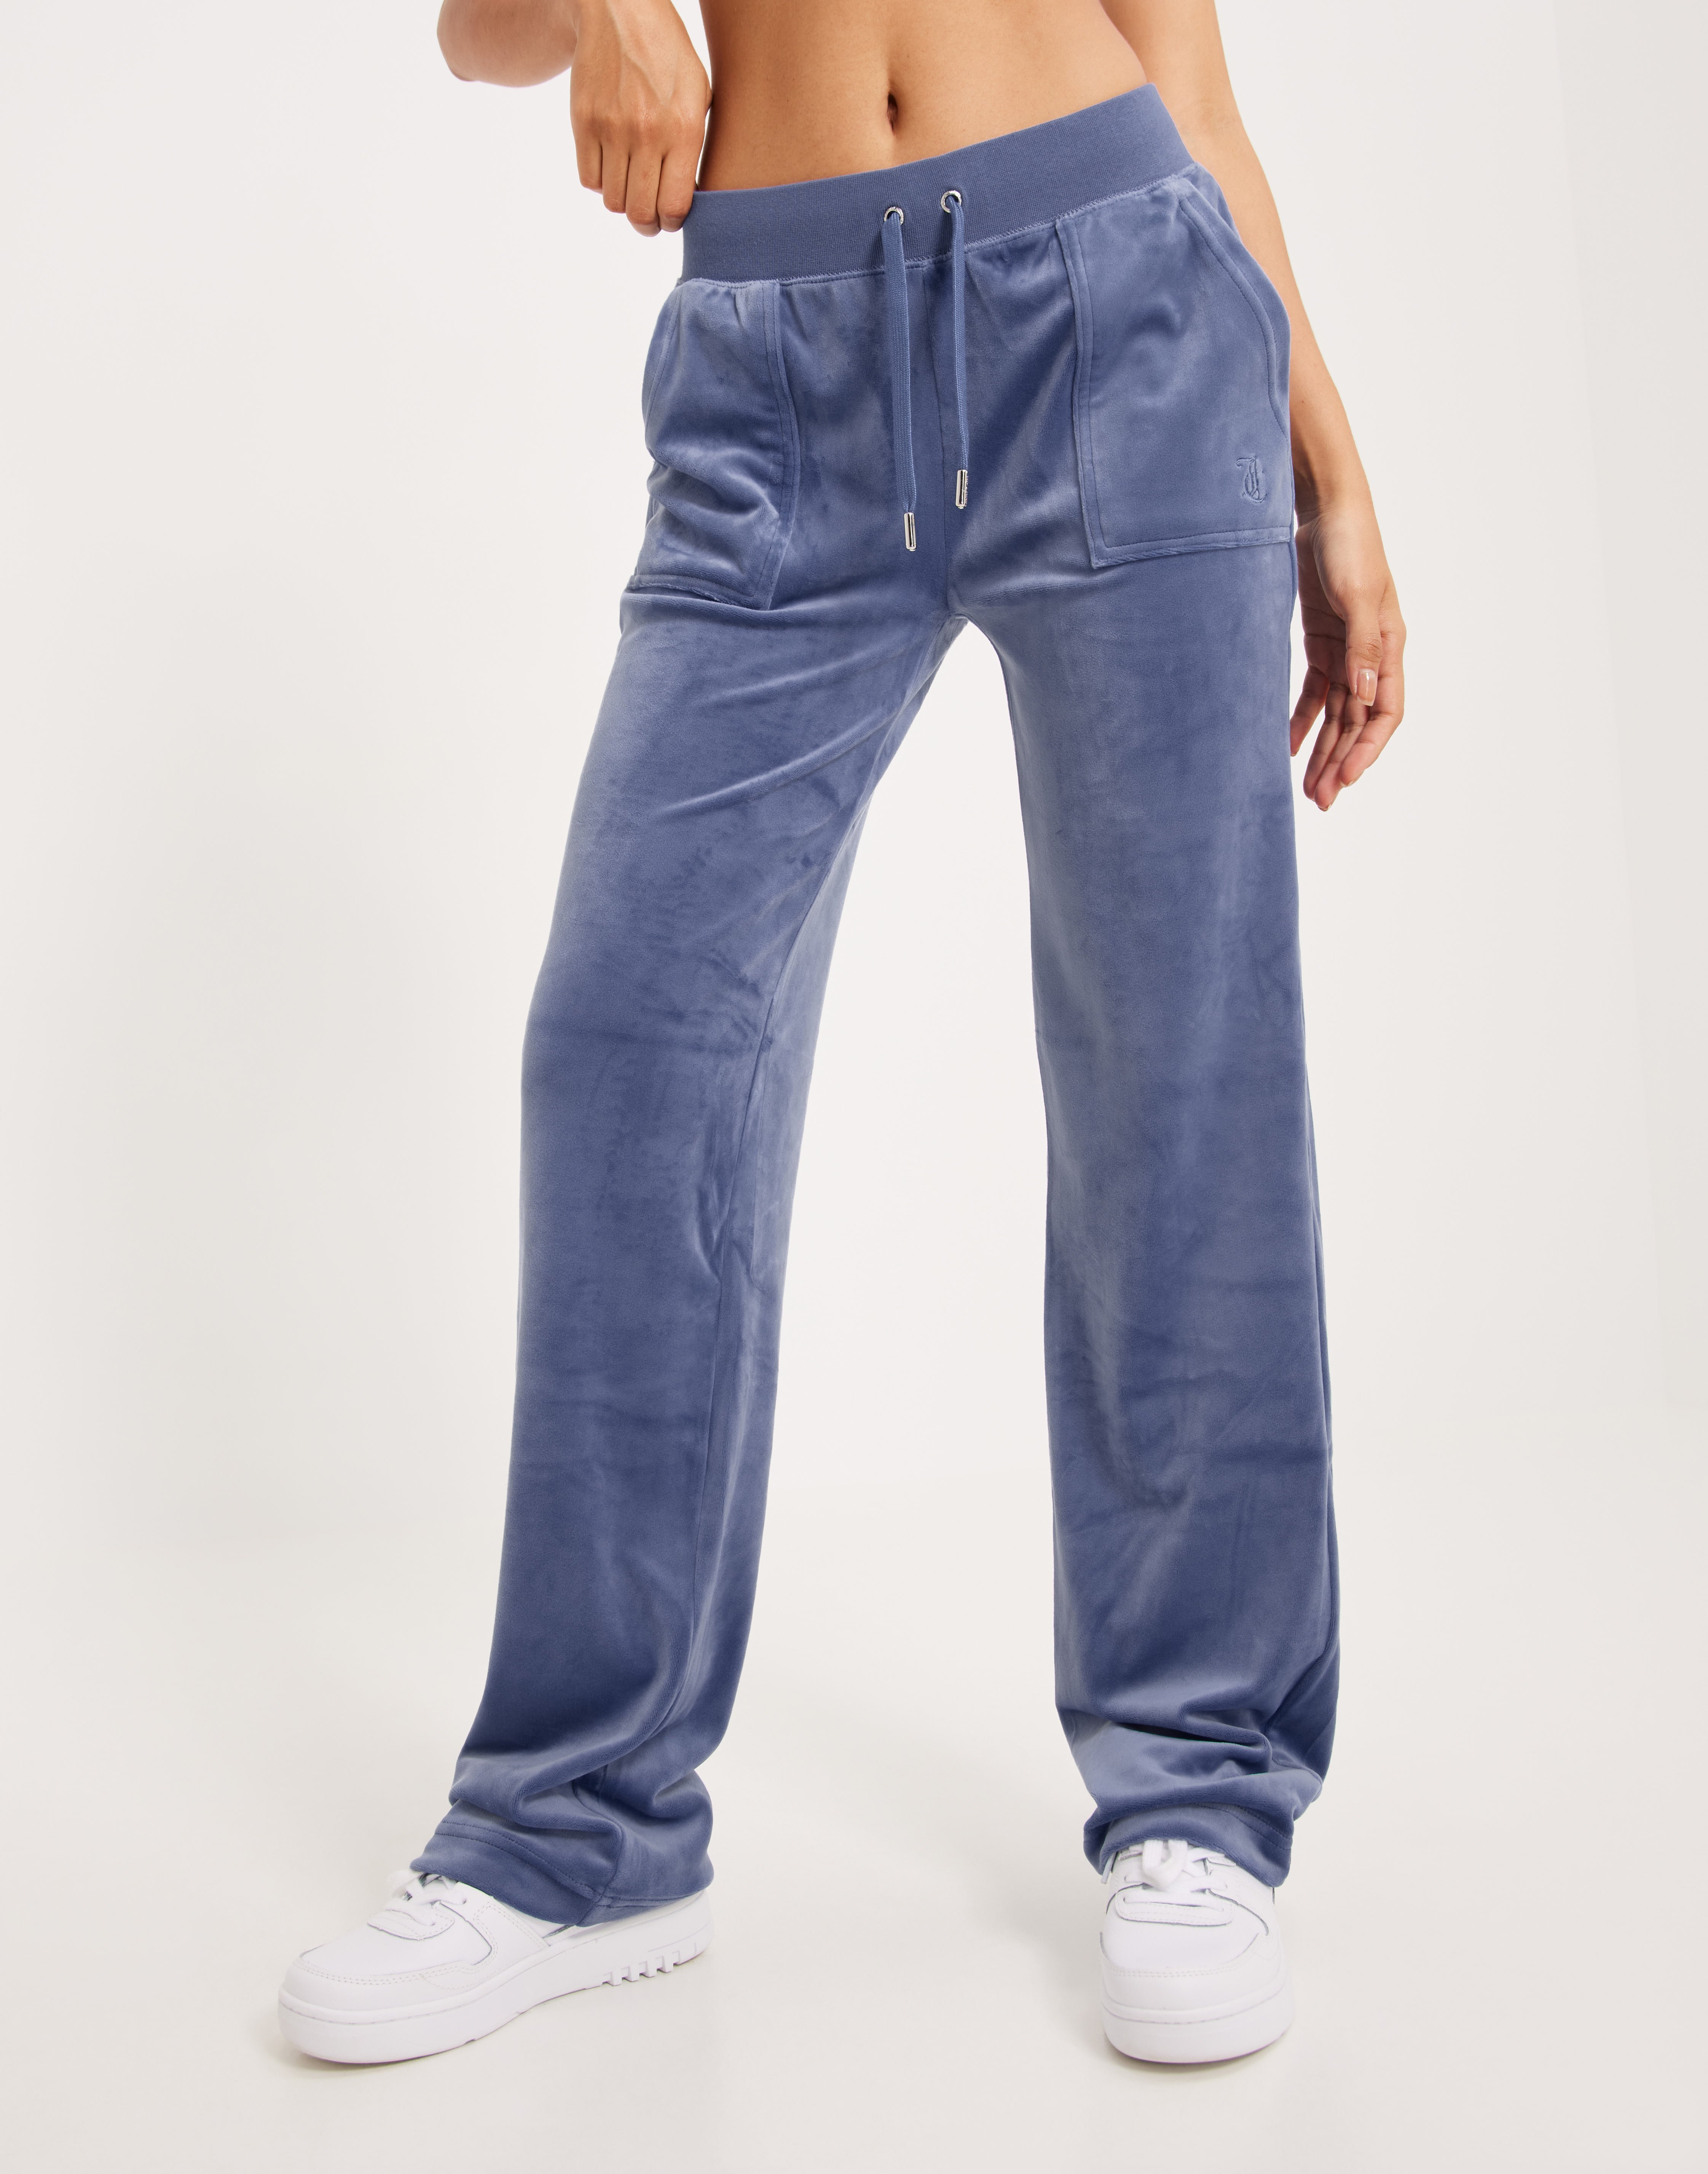 Del Ray Classic Velour Pant - Grey/Blue - Nelly.com